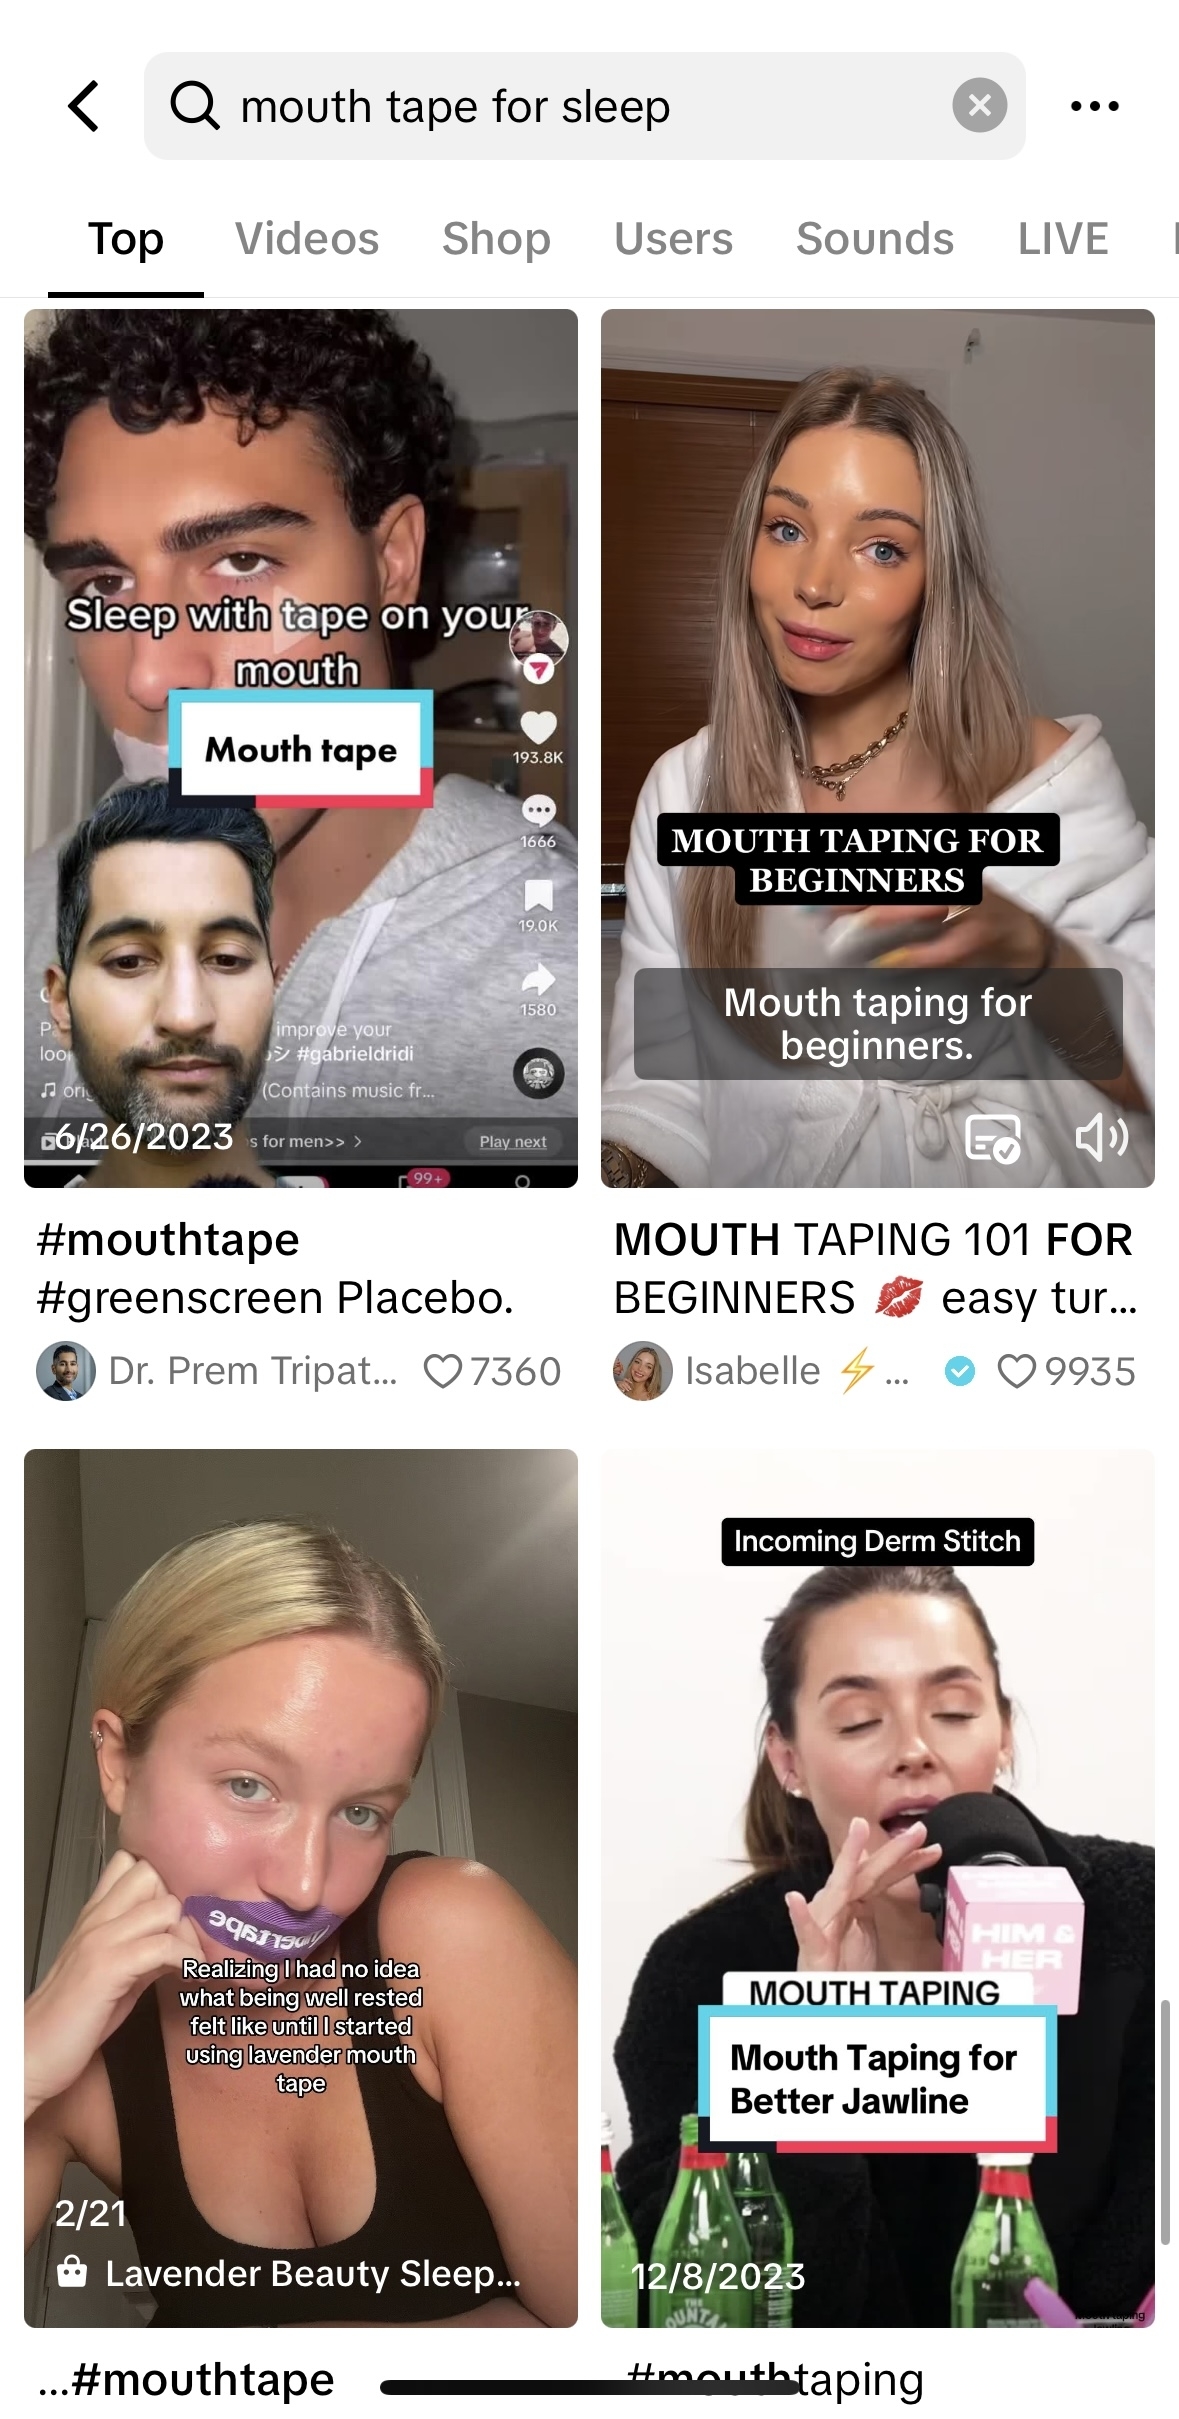 Four thumbnails of different people demonstrating mouth taping, a wellness trend